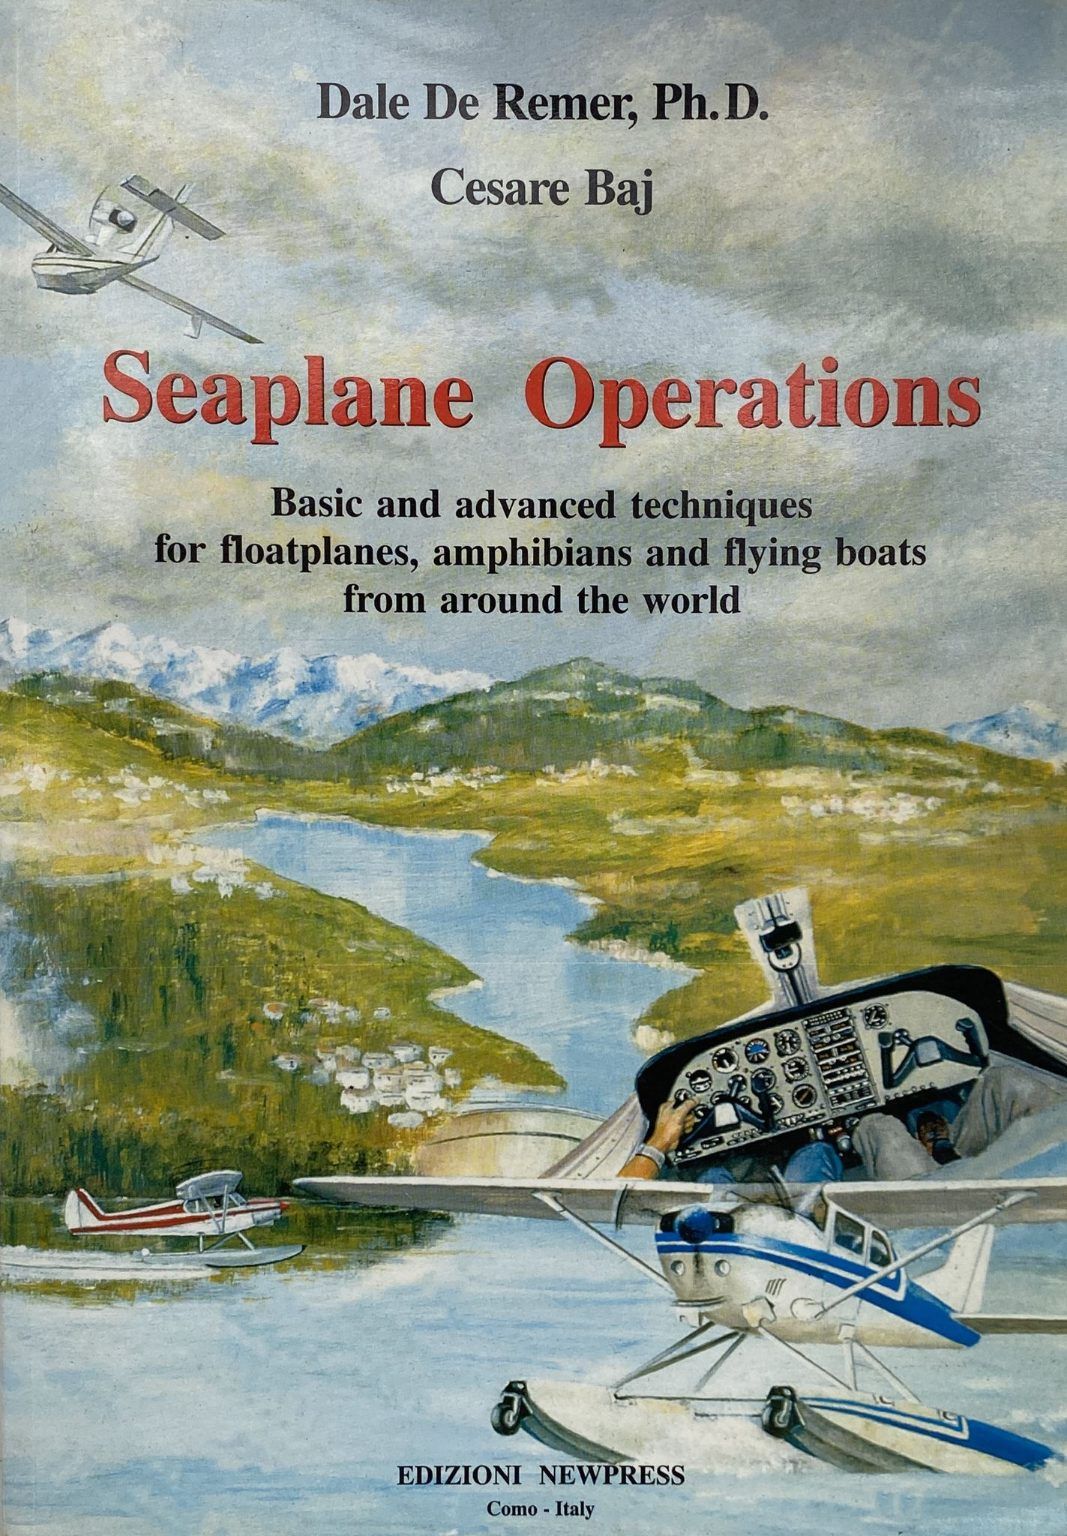 SEAPLANE OPERATIONS: Basic and Advanced Techniques for Floatplanes